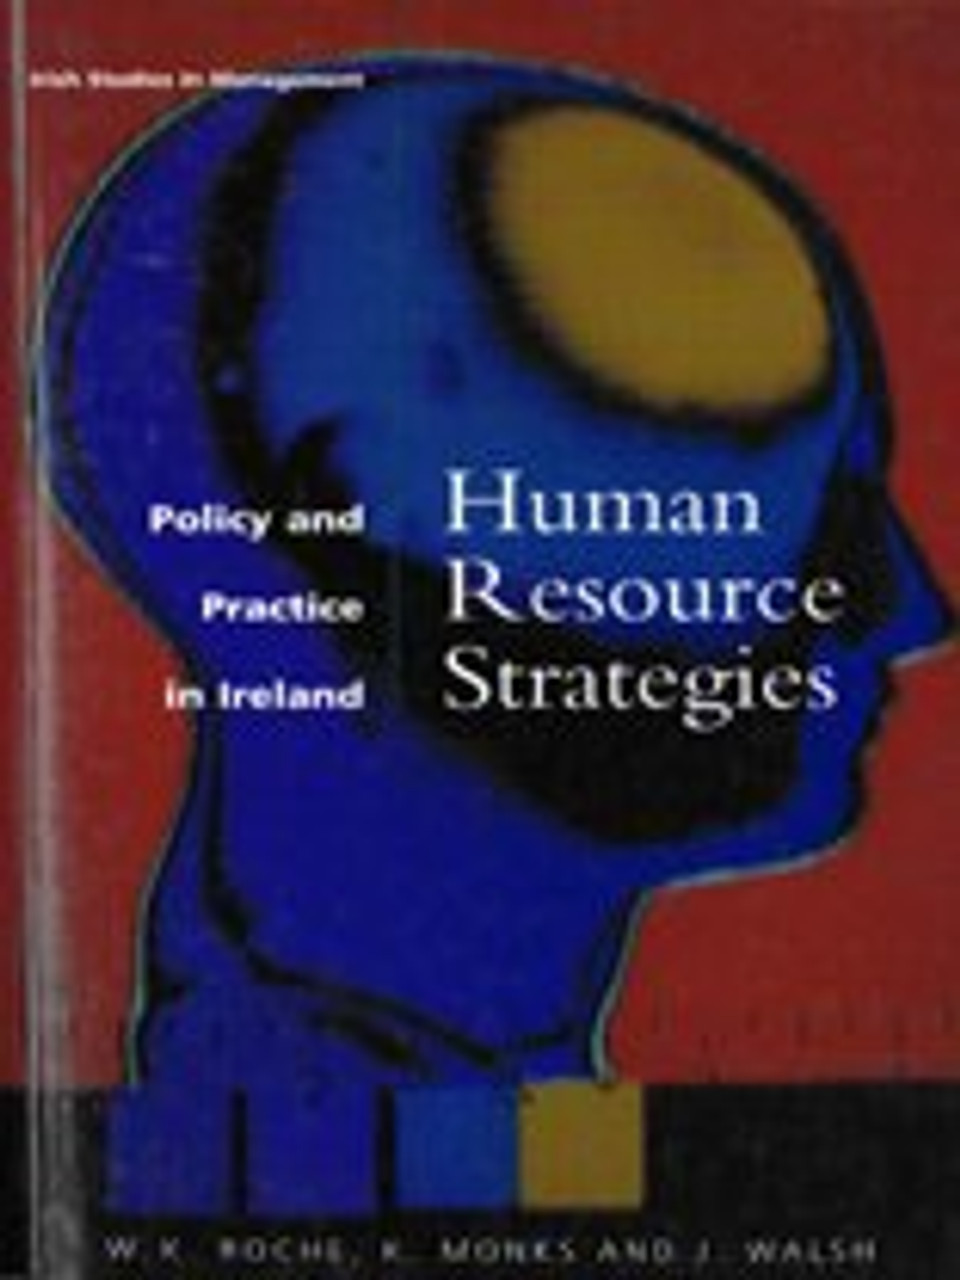 William Roche / Human Resource Strategies: Policy and Practice in Ireland (Large Paperback)